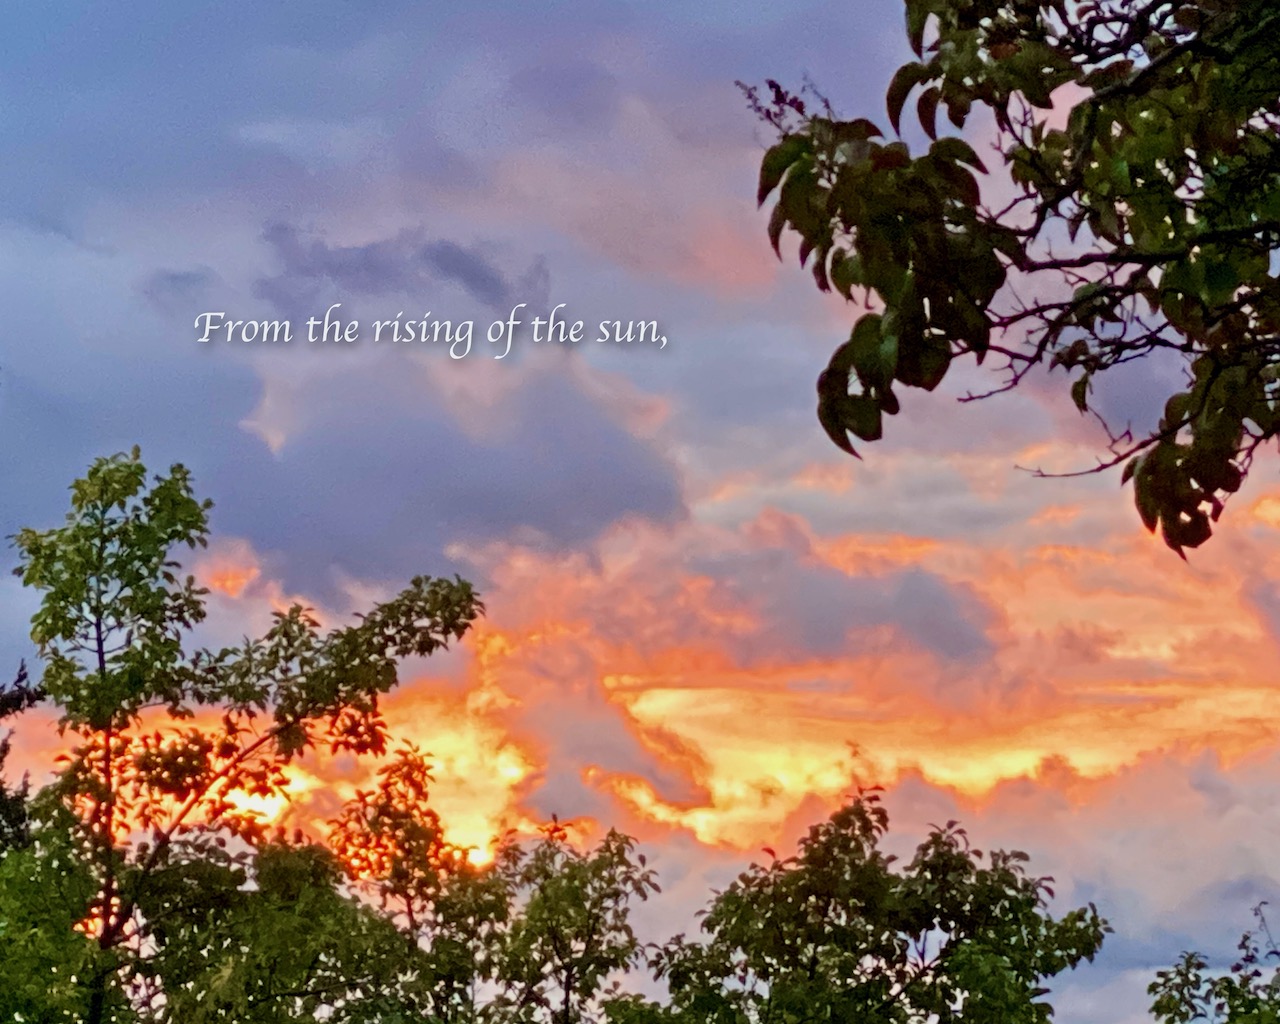 From the rising of the sun